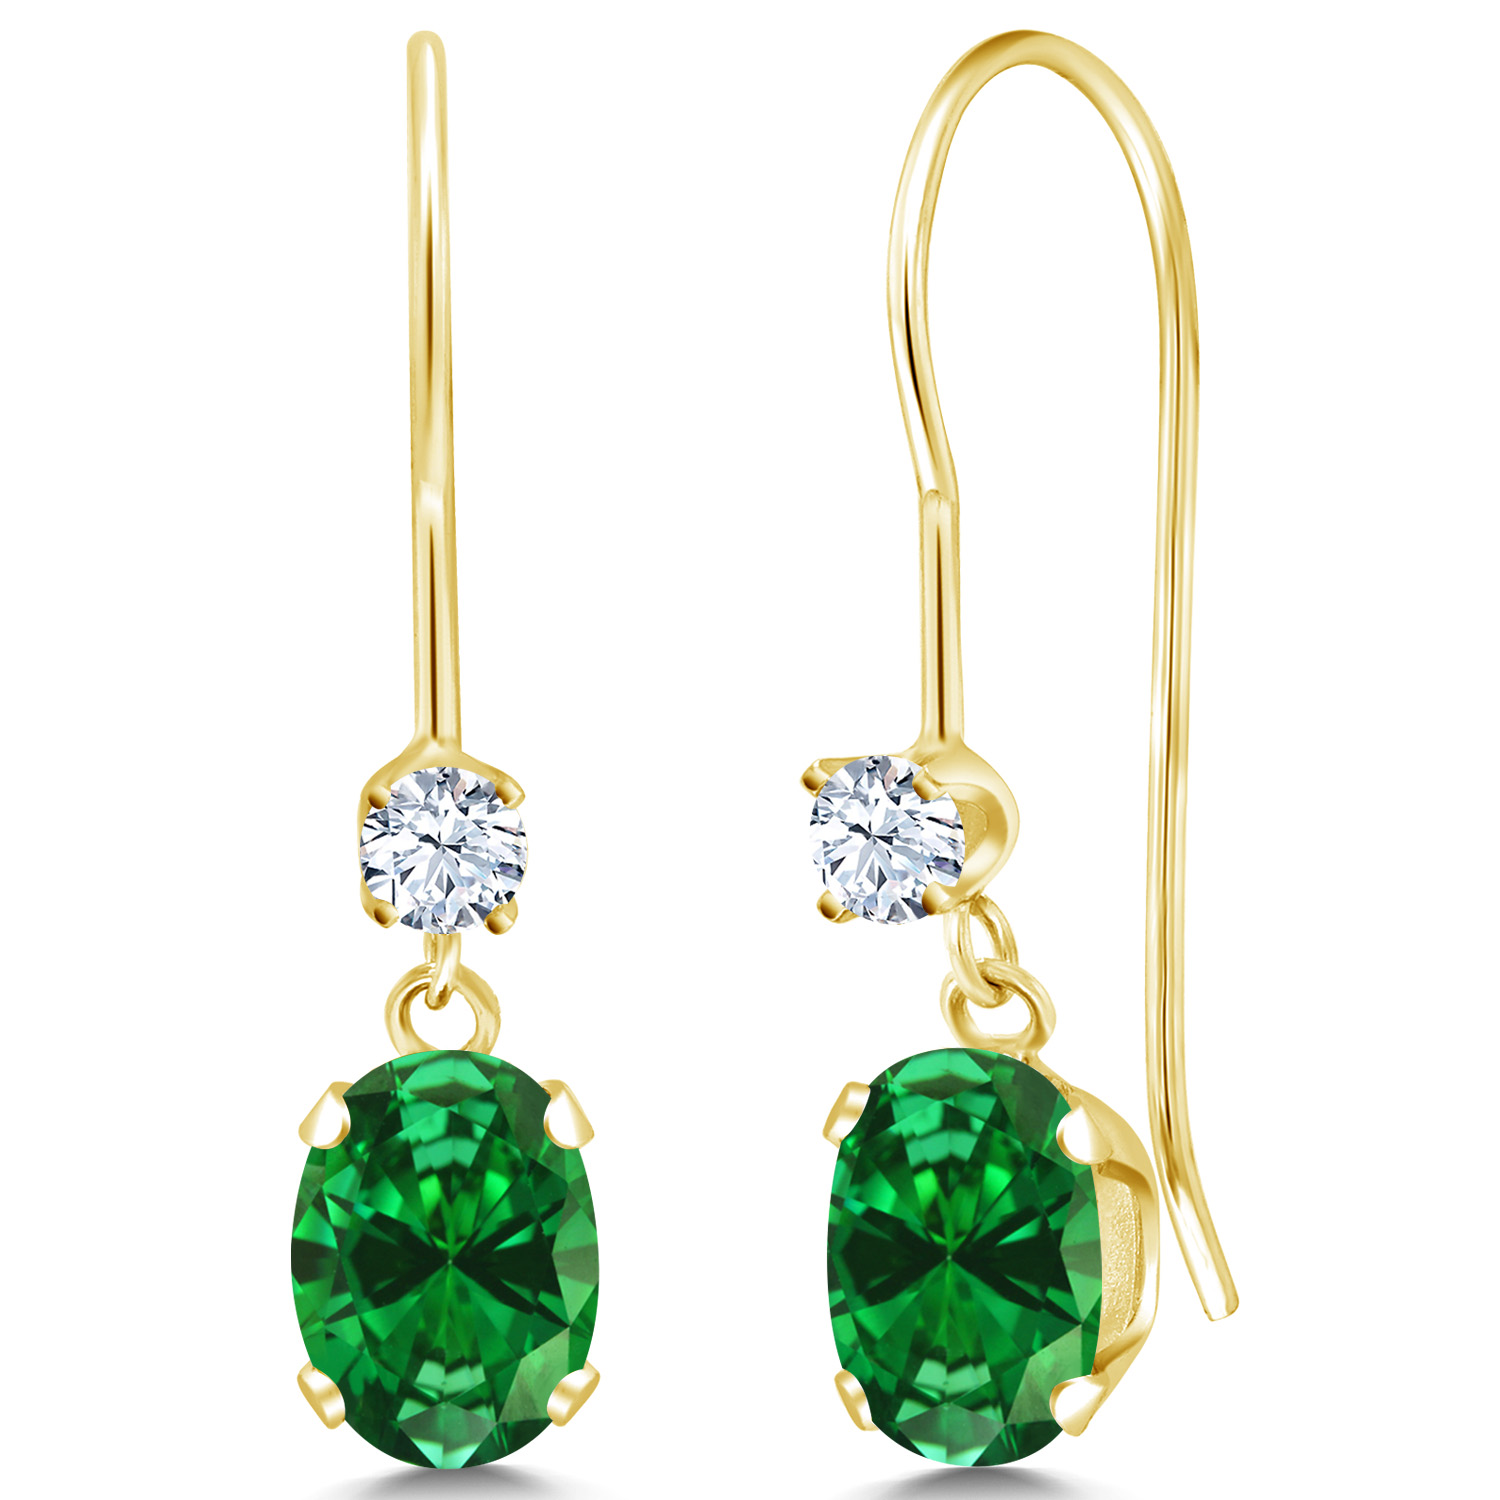 Gem Stone King 14K Yellow Gold Green Simulated Emerald Dangle Earrings For Women (1.46 Cttw, Oval 6X4MM)